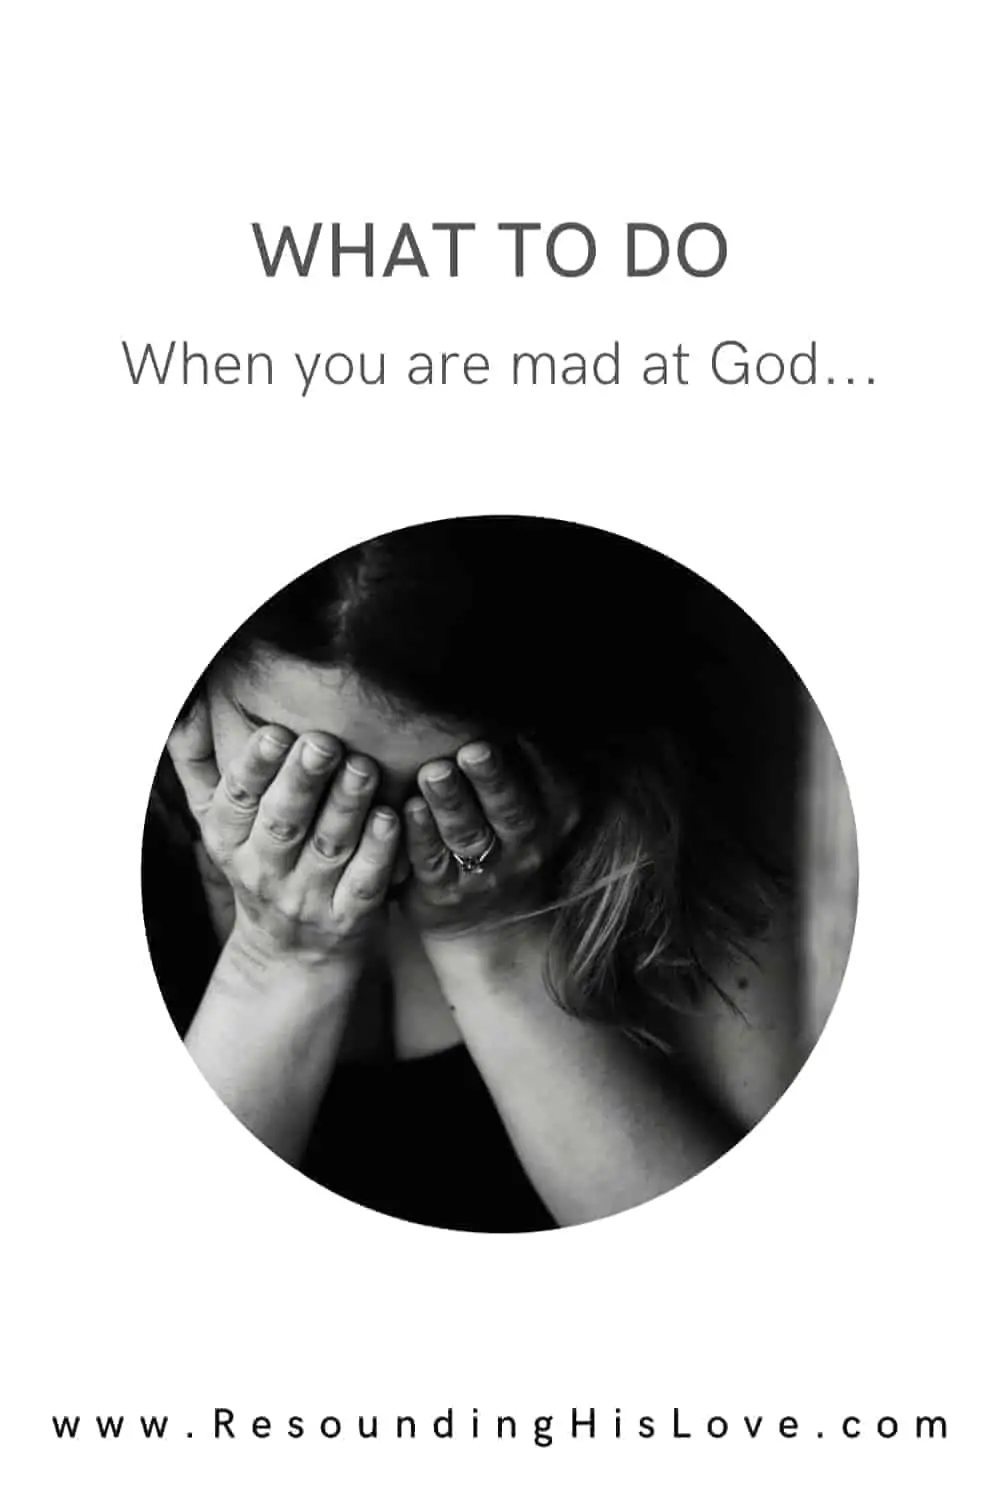 an image of a woman clasping her hands to her face crying with text Shattered: Mad at God